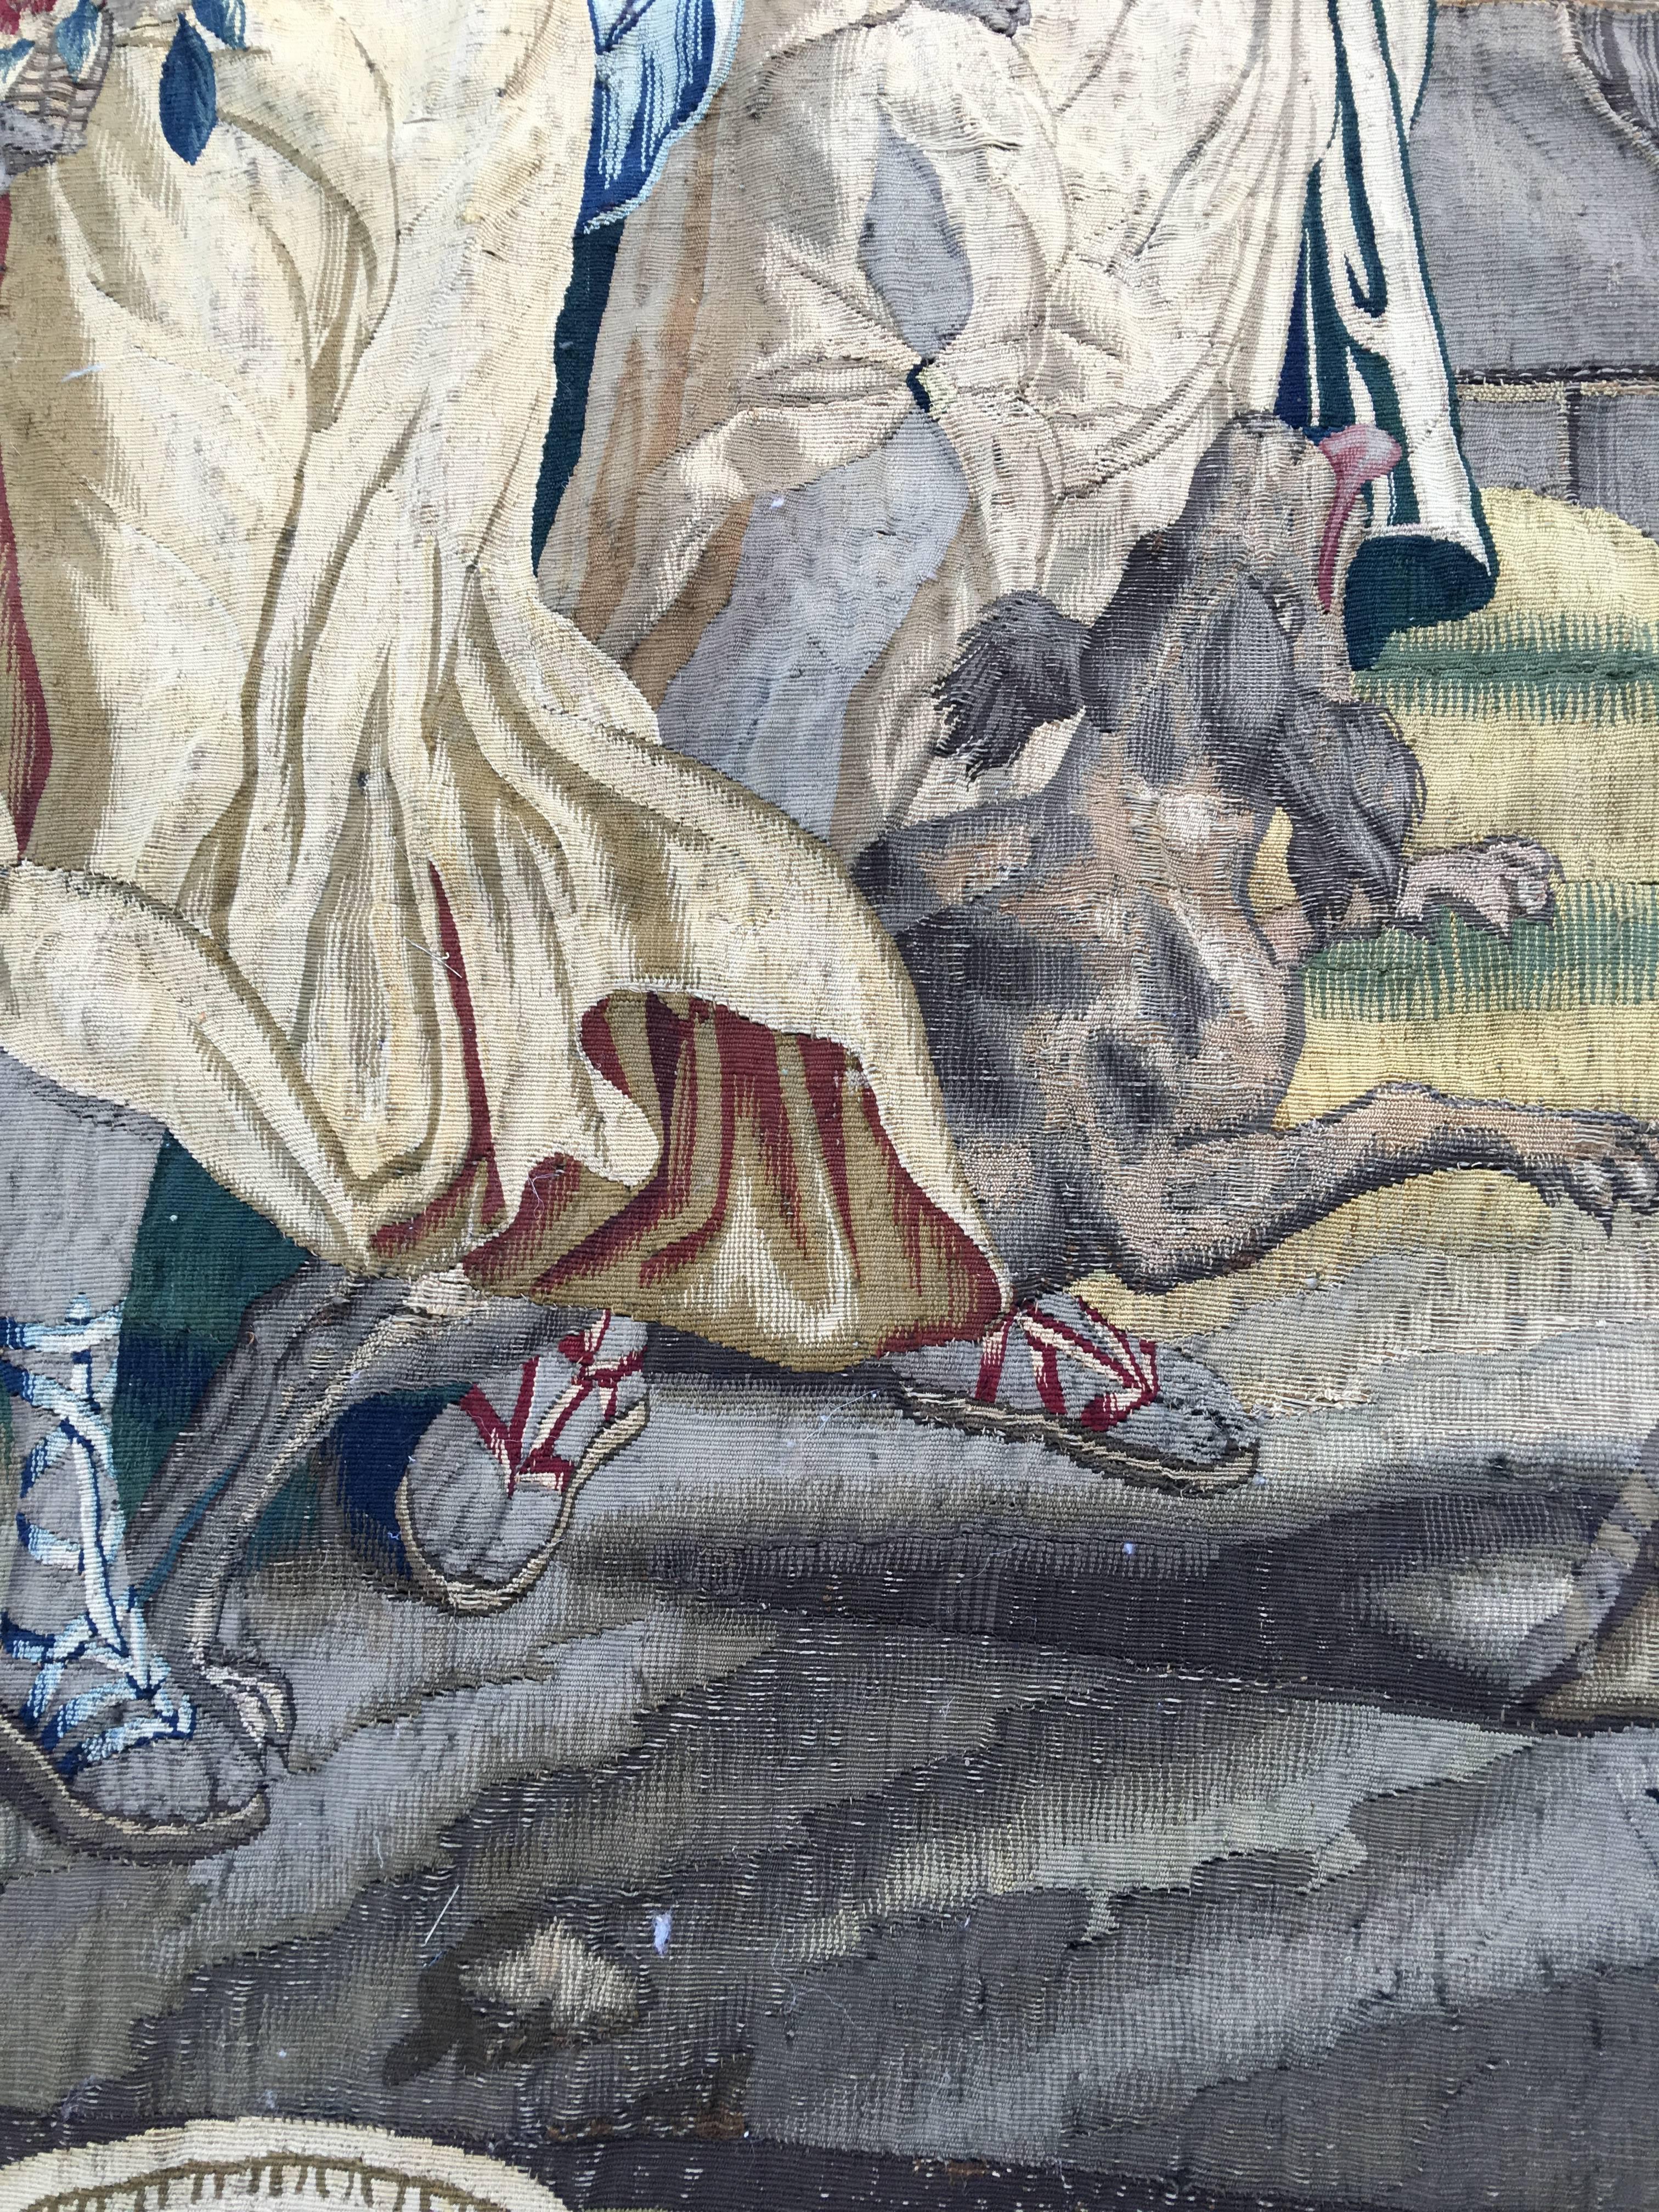 Large early Aubusson tapestry with multiple figures and a dog.